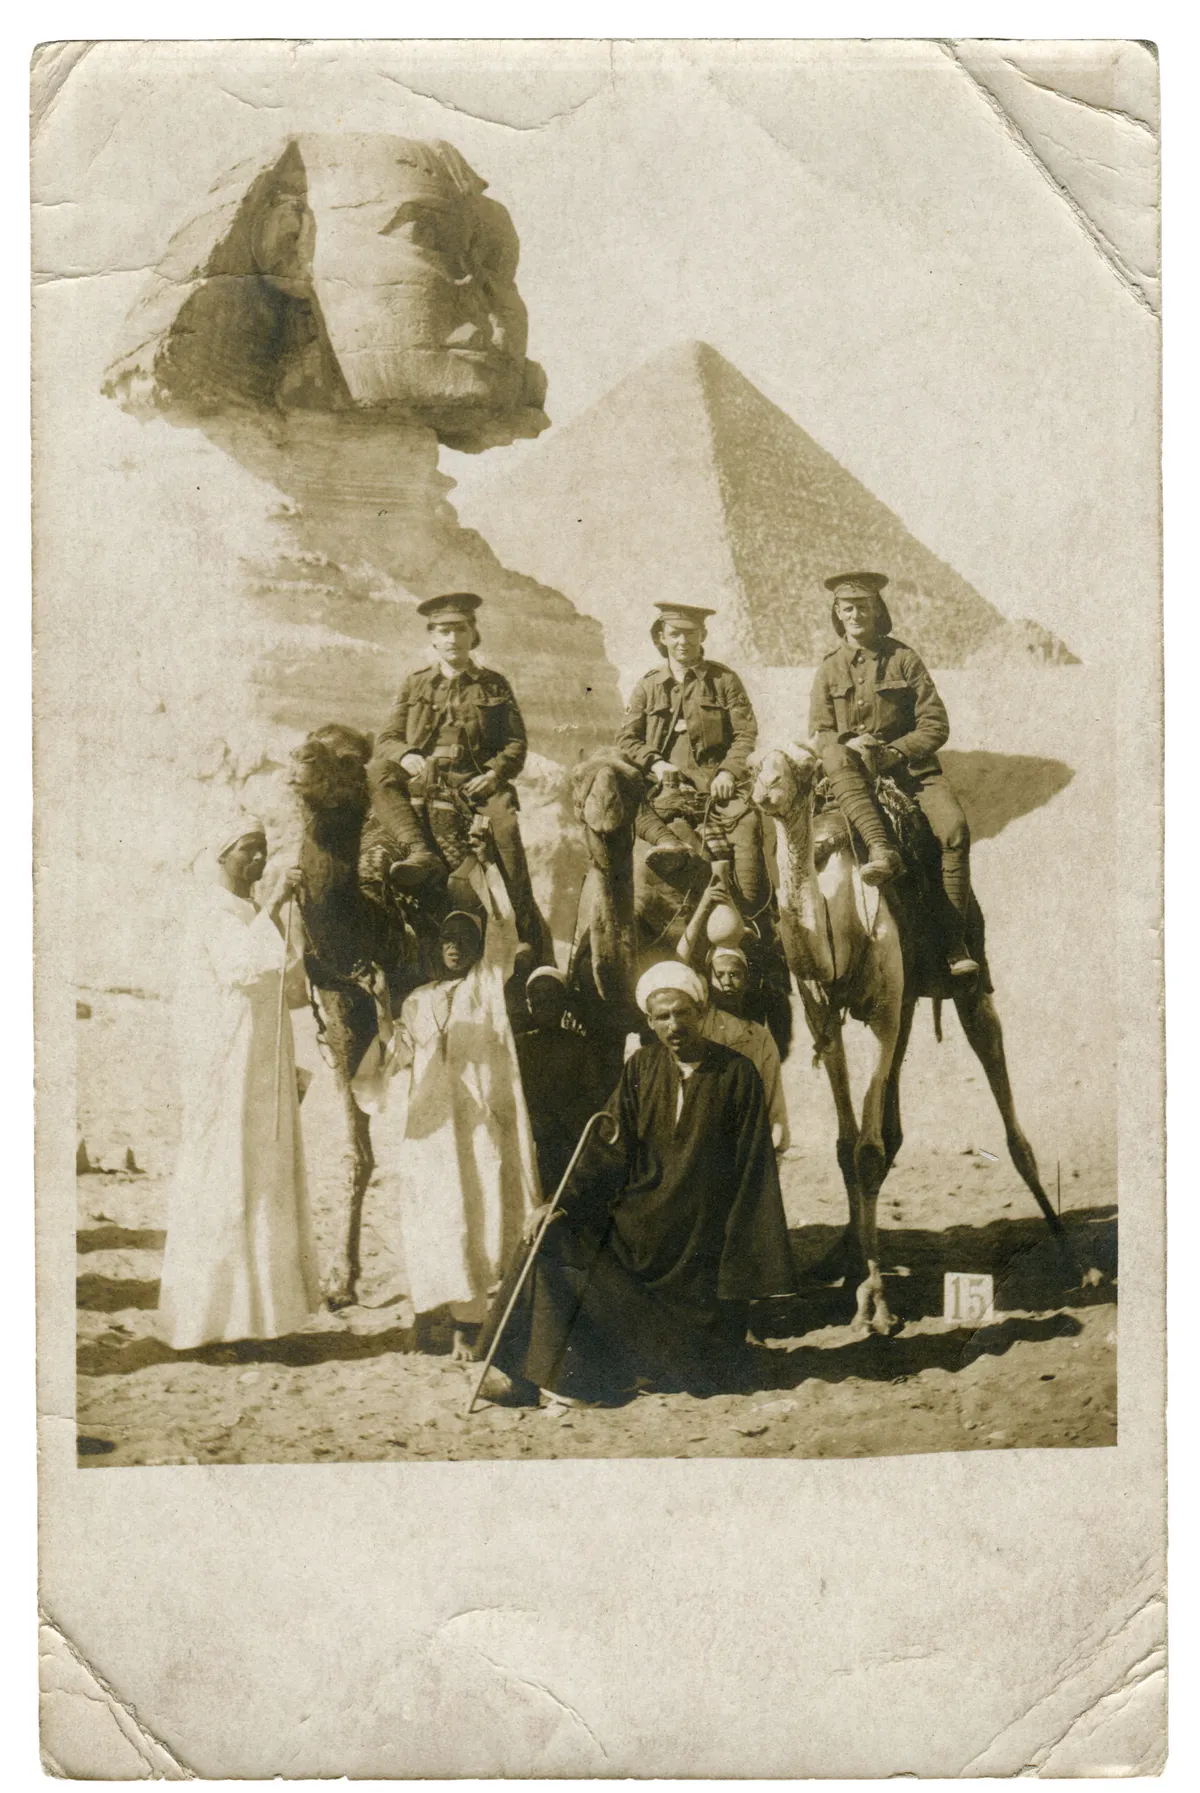 A black and white photograph of three men in British army uniform on camels in front of the Great Sphinx of Giza and a pyramid, with two Egyptian men and two children on foot